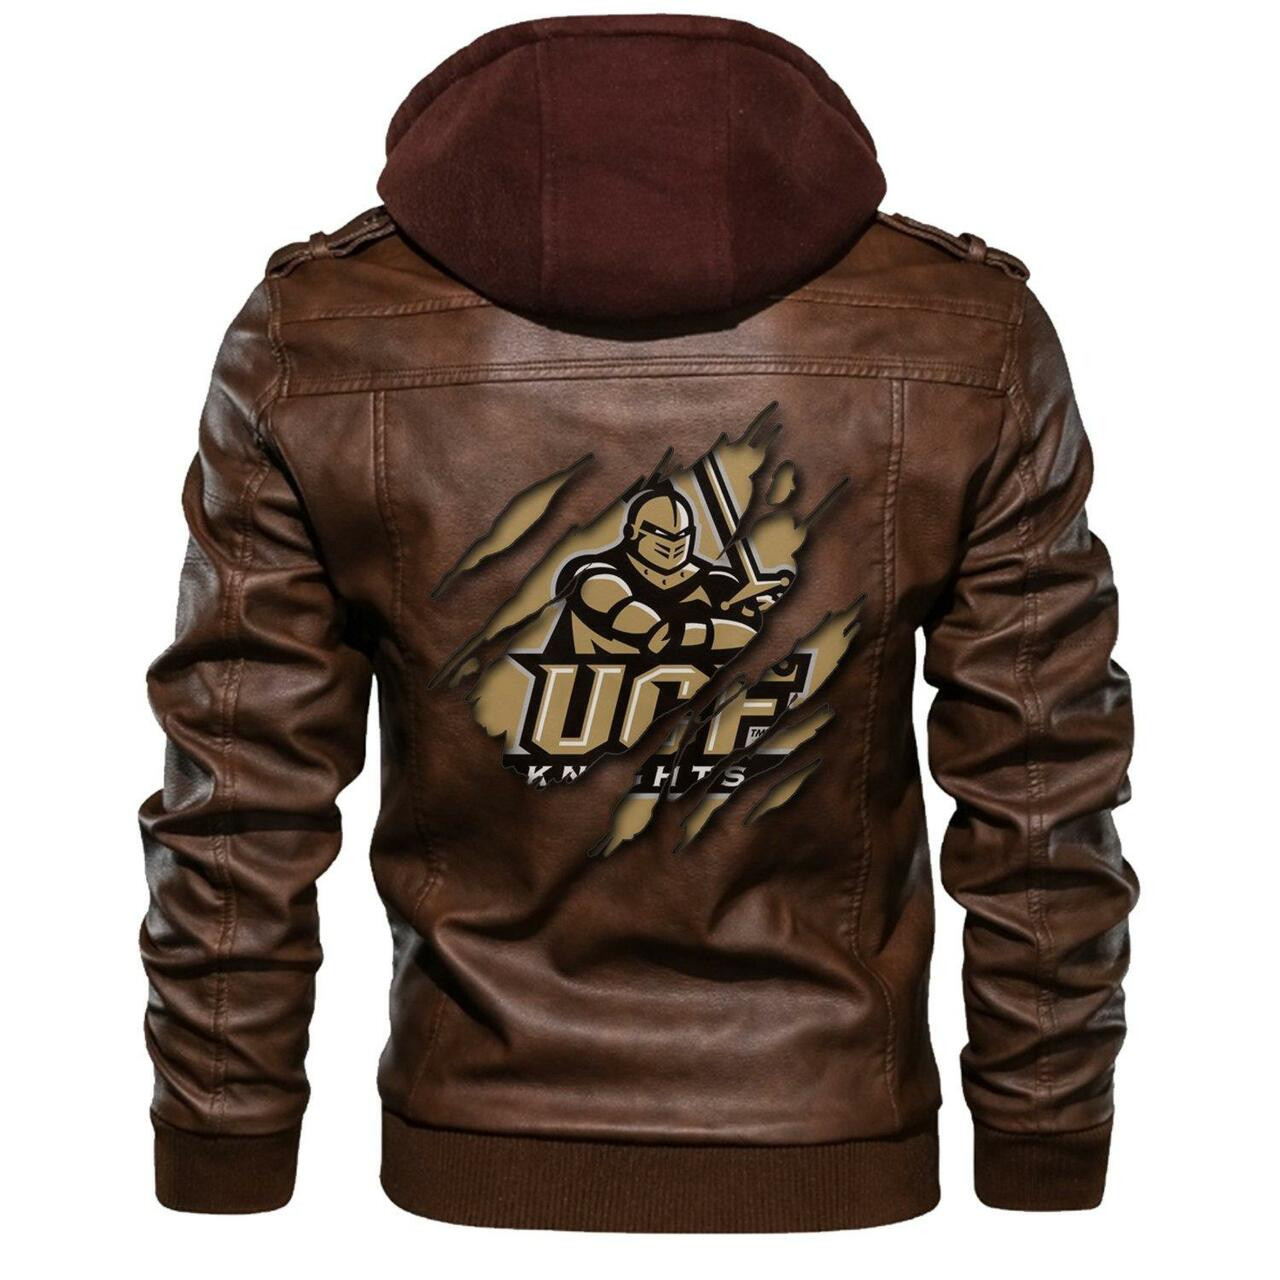 To get a great look, consider purchasing This New Leather Jacket 146